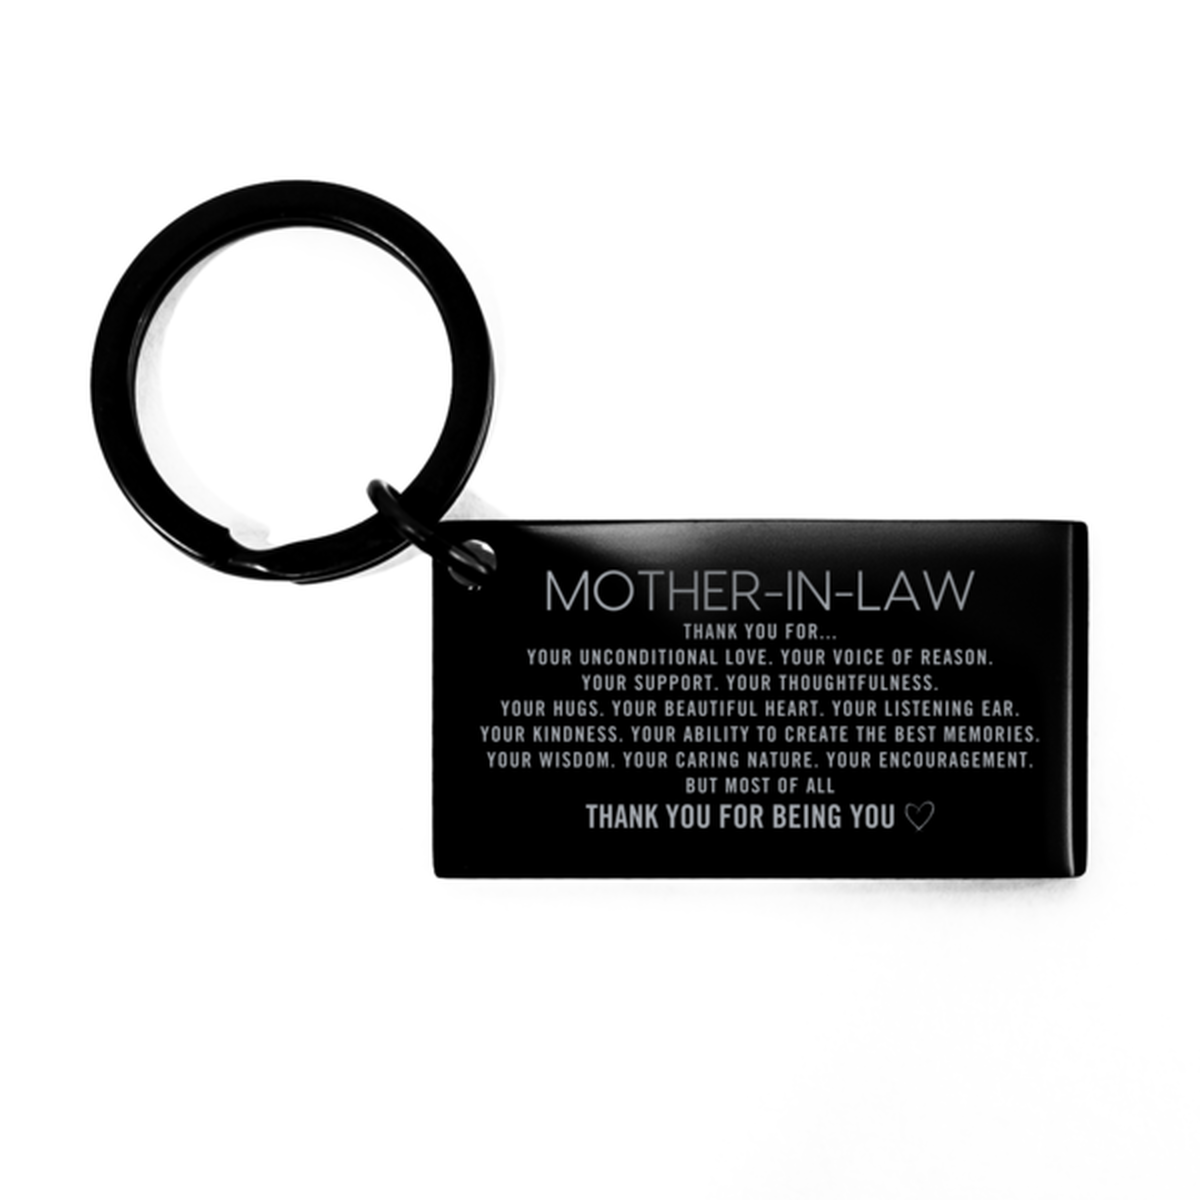 Mother-In-Law Keychain Custom, Engraved Gifts For Mother-In-Law Christmas Graduation Birthday Gifts for Men Women Mother-In-Law Thank you for Your unconditional love